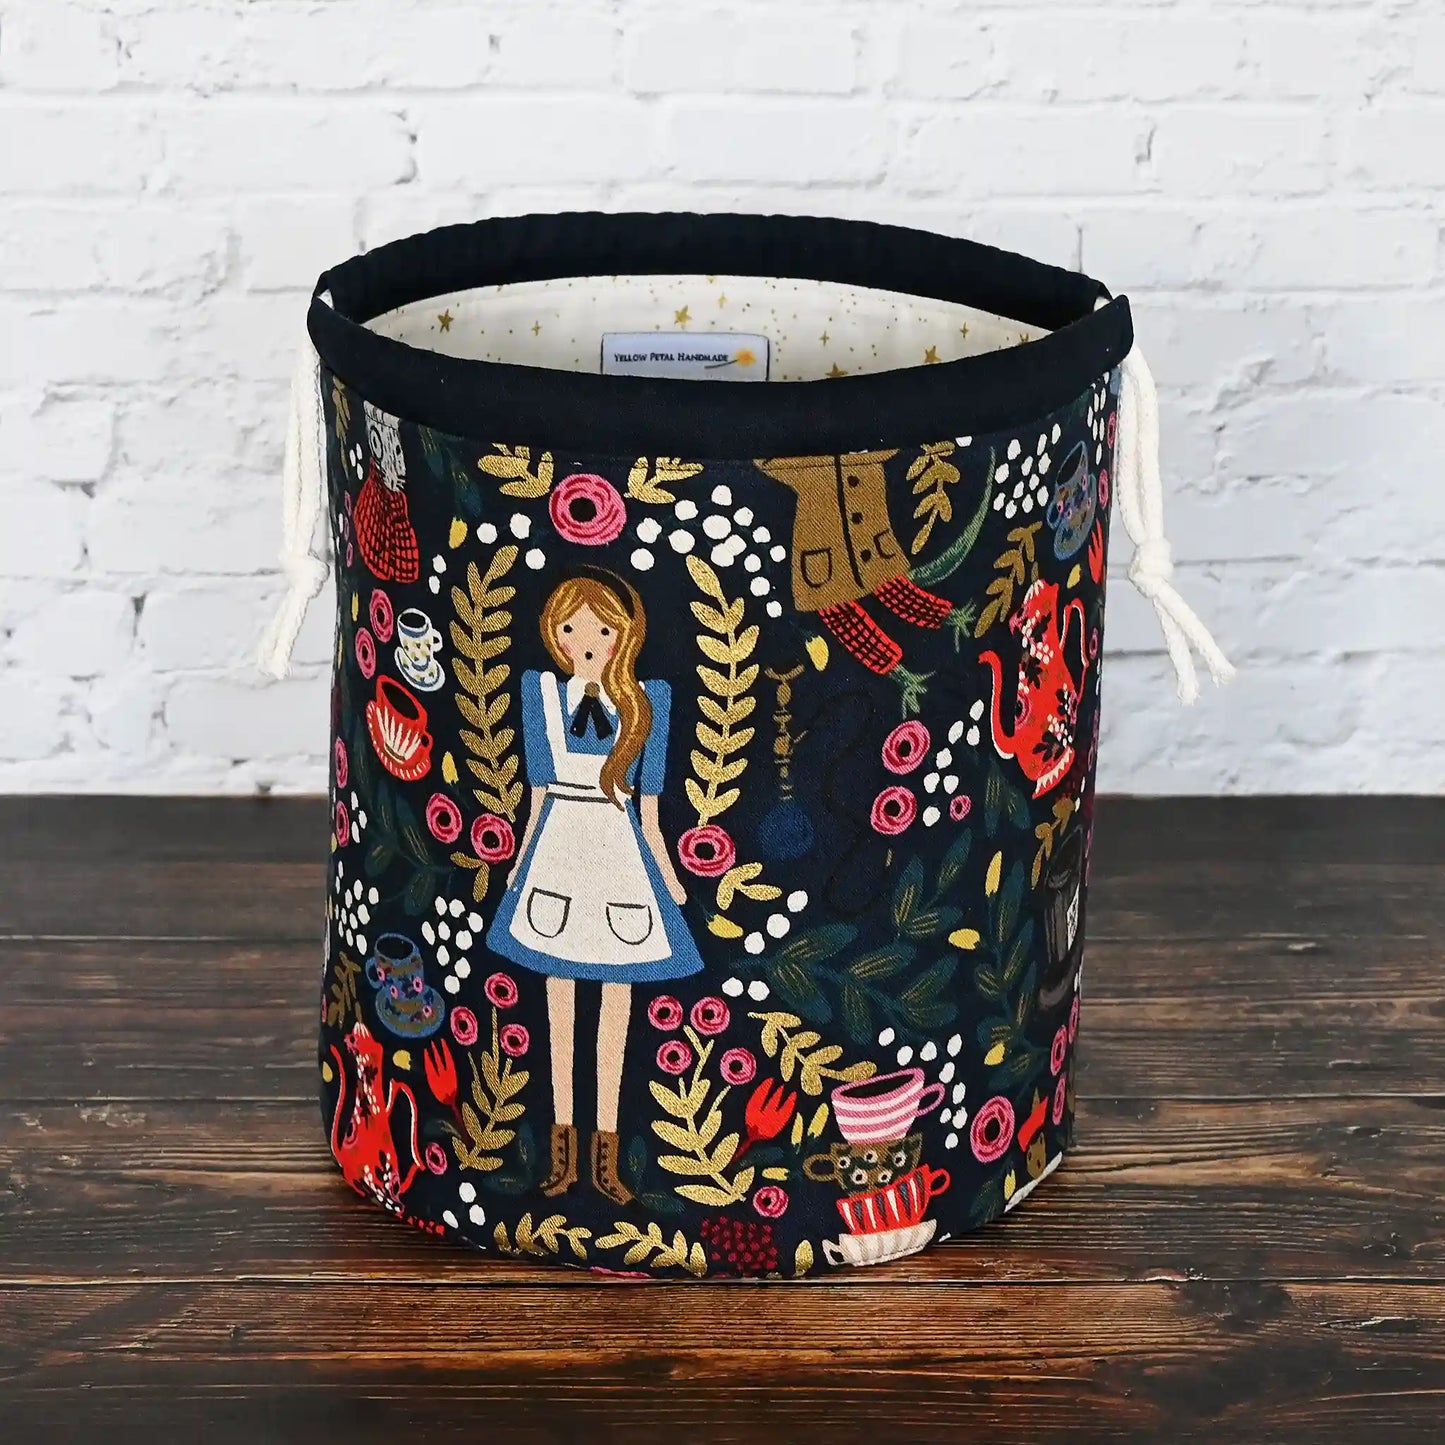 Gorgeous navy bucket bag made from canvas with a beautiful Alice in Wonderland pattern.  It has lots of pockets and is structured to stand alone.  Made in Canada by Yellow Petal Handmade.